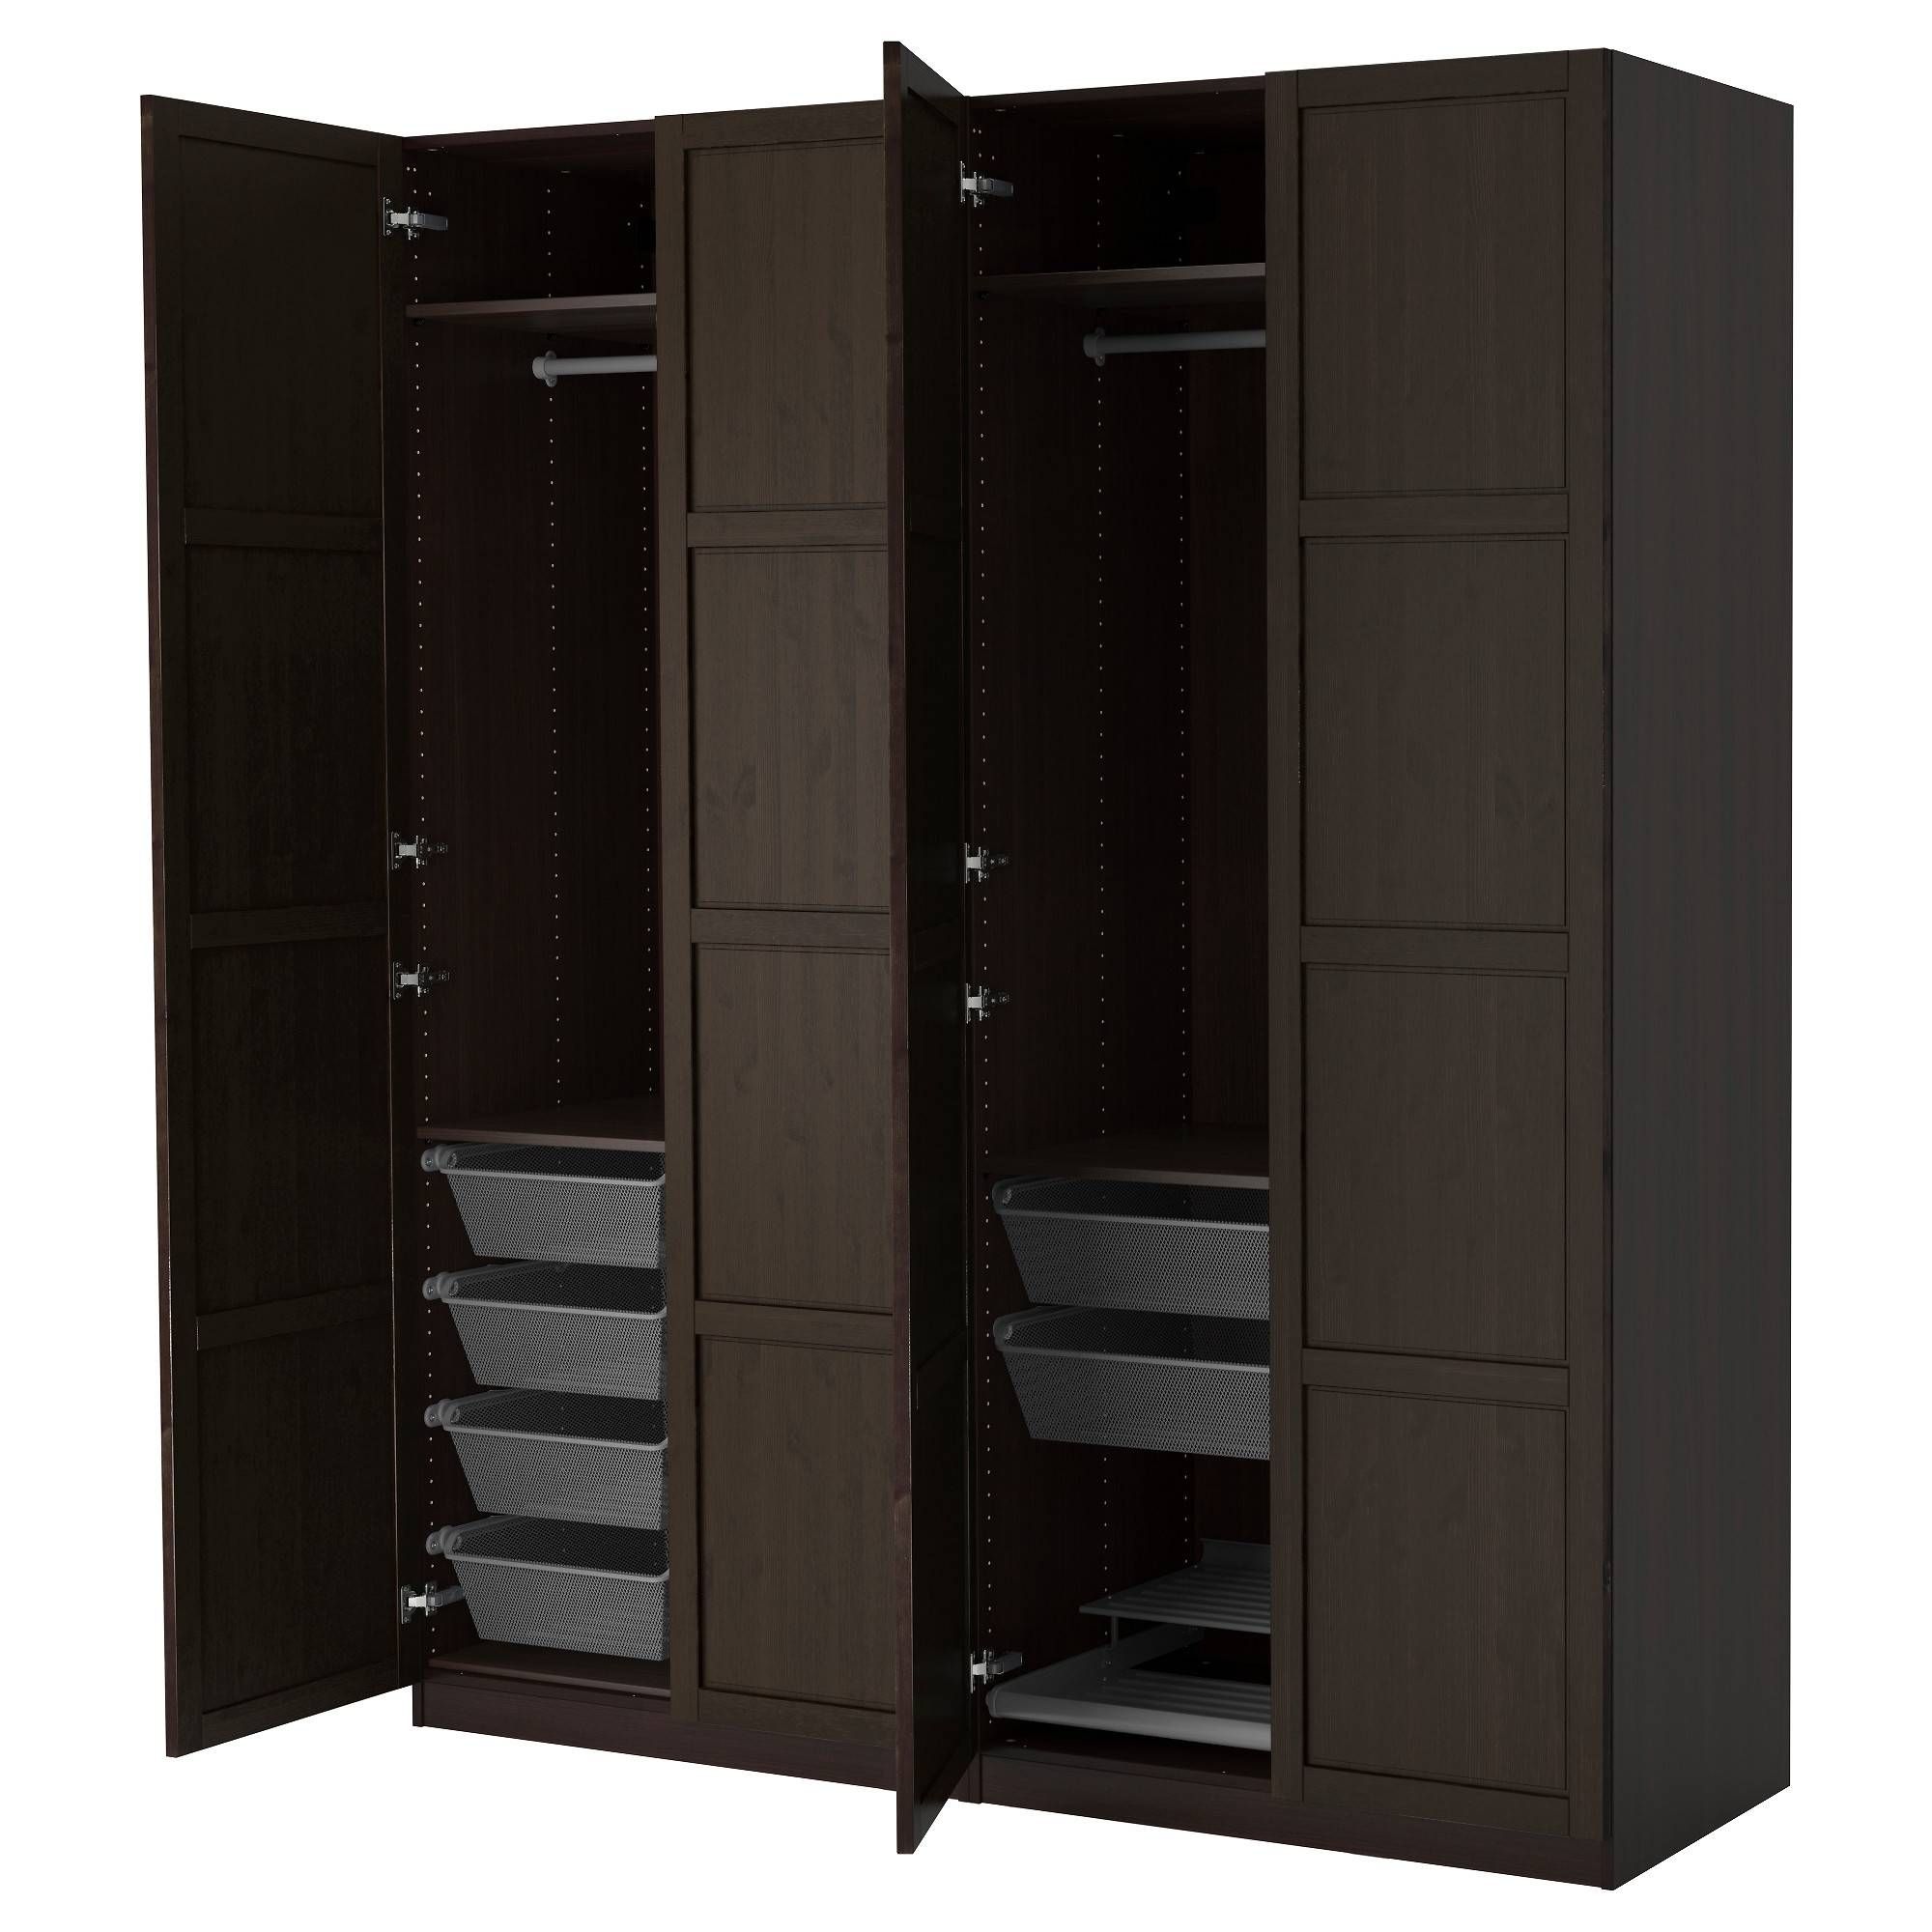 Hemnes Bedroom Series – Ikea Within Wardrobe Drawers And Shelves Ikea (View 11 of 30)